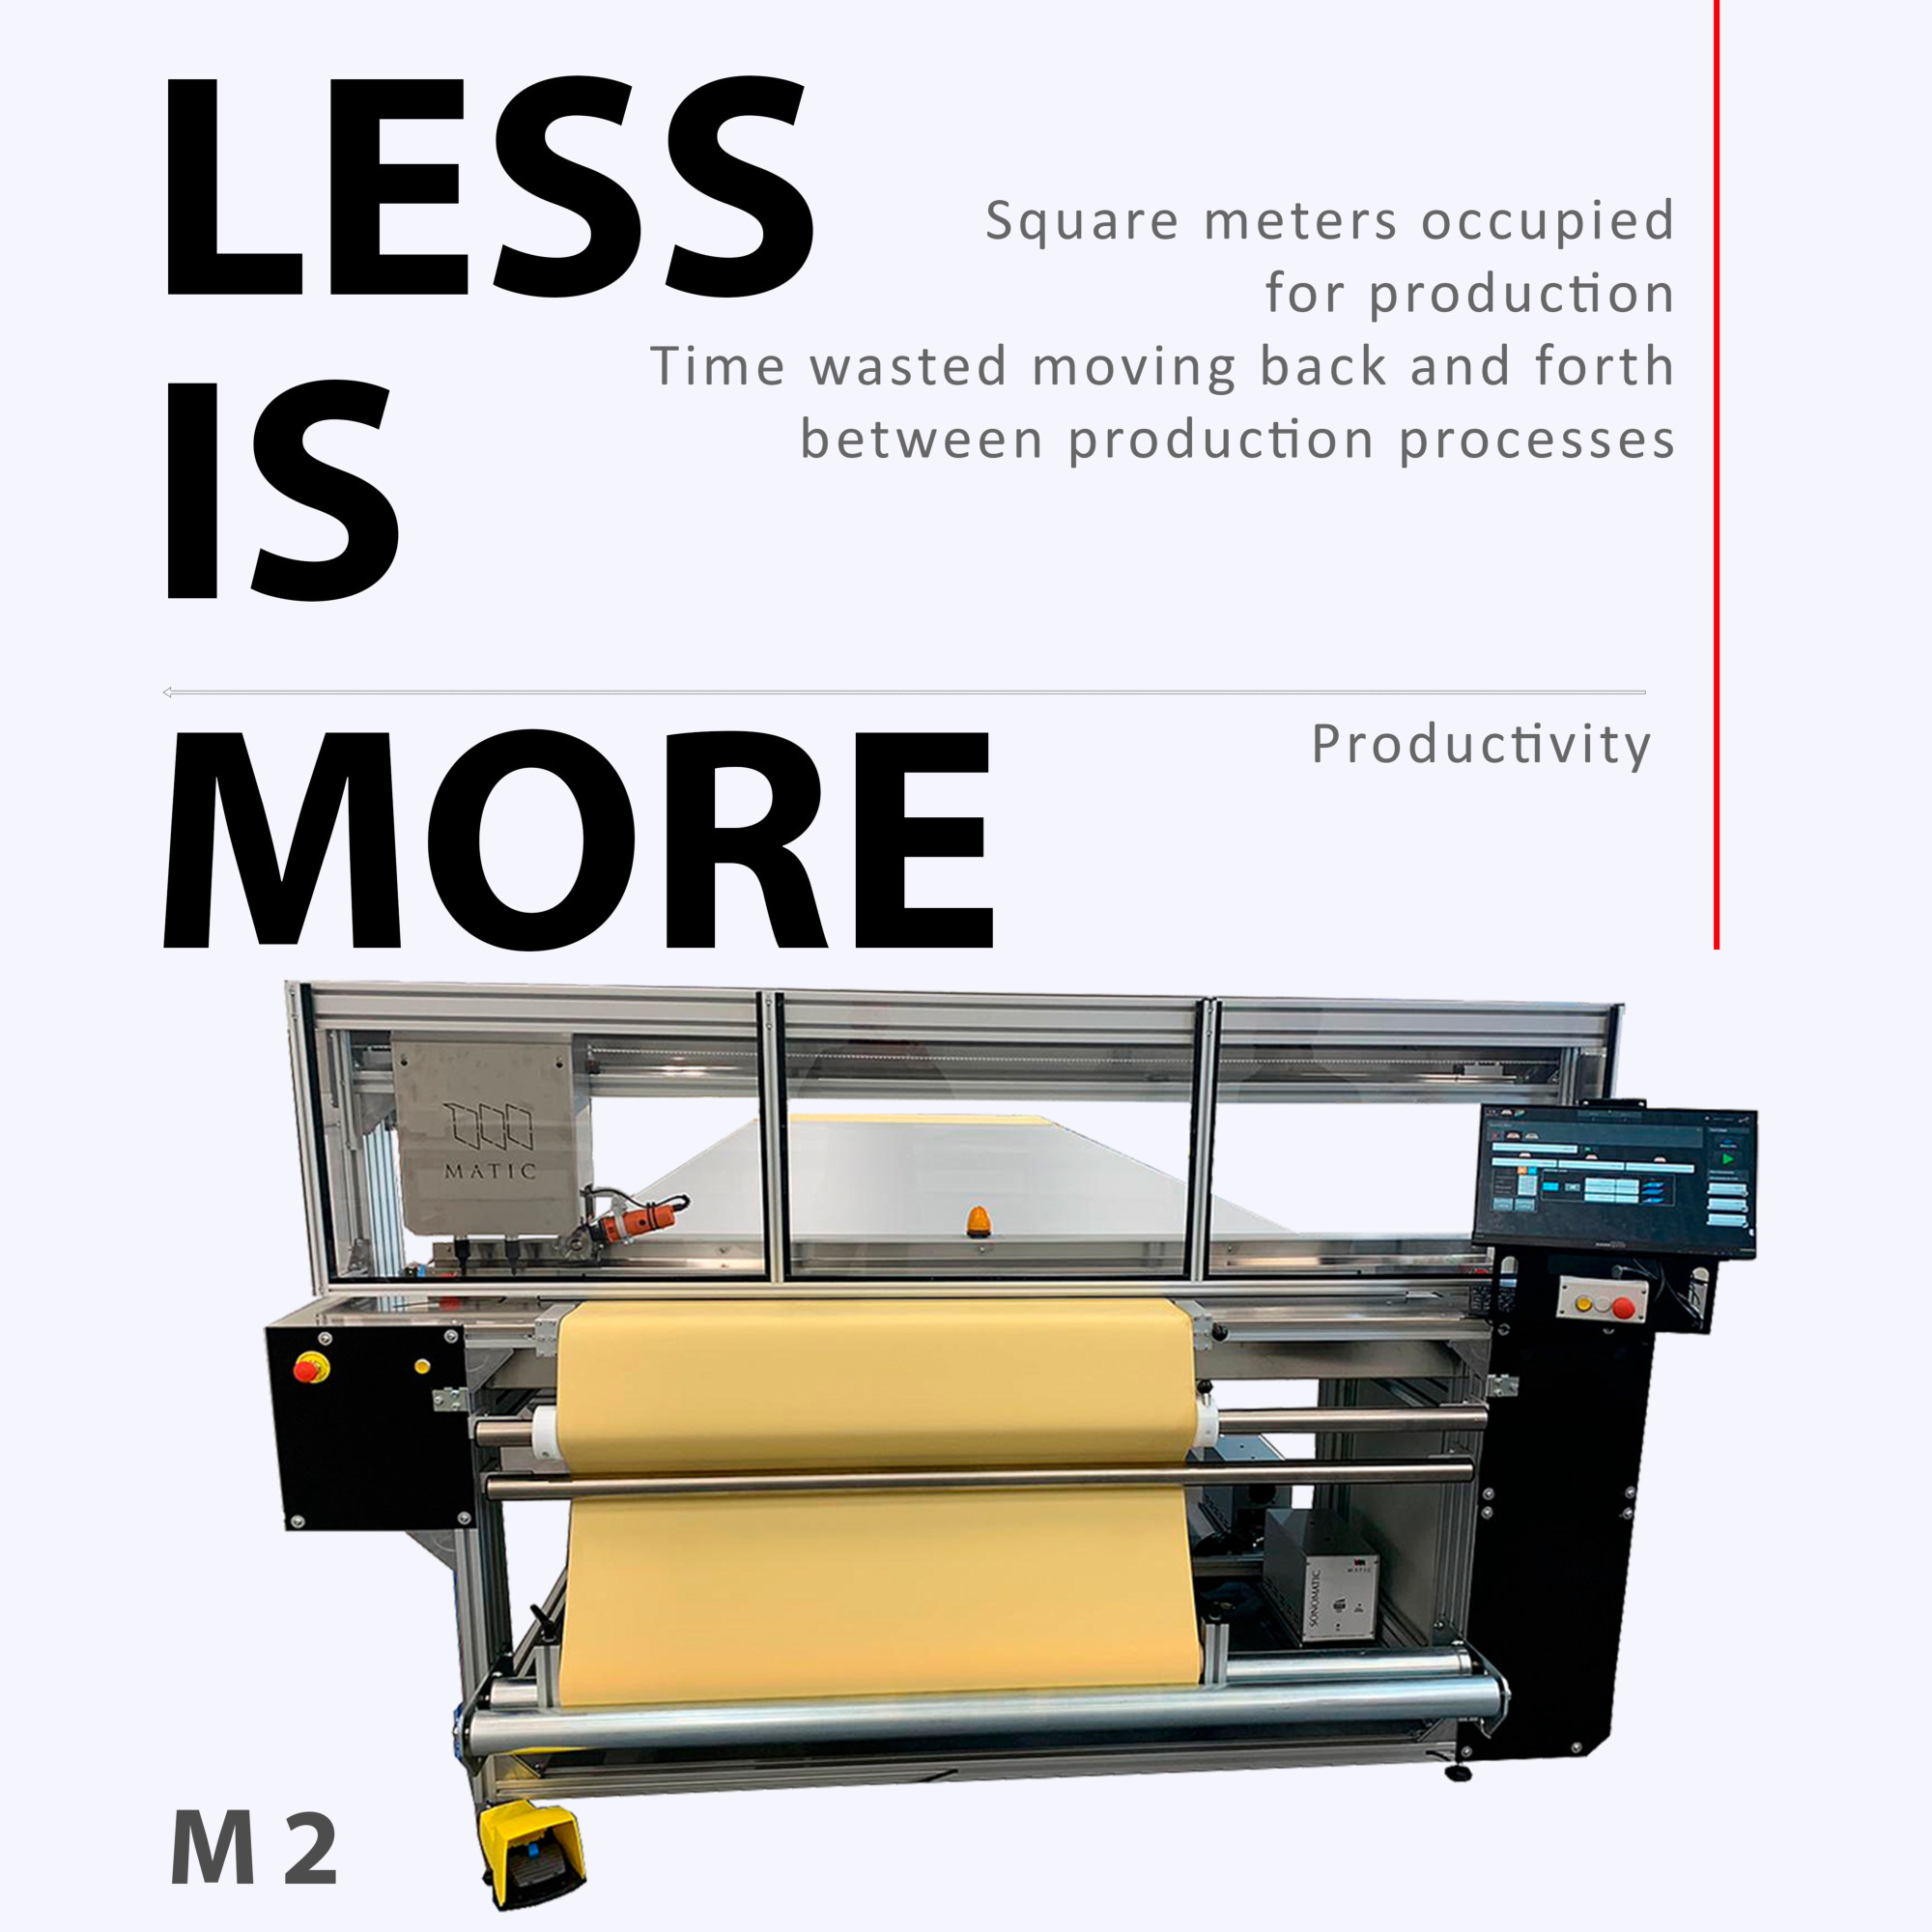 LESS IS MORE (3) – LESS square meters occupied for production, MORE productivity 